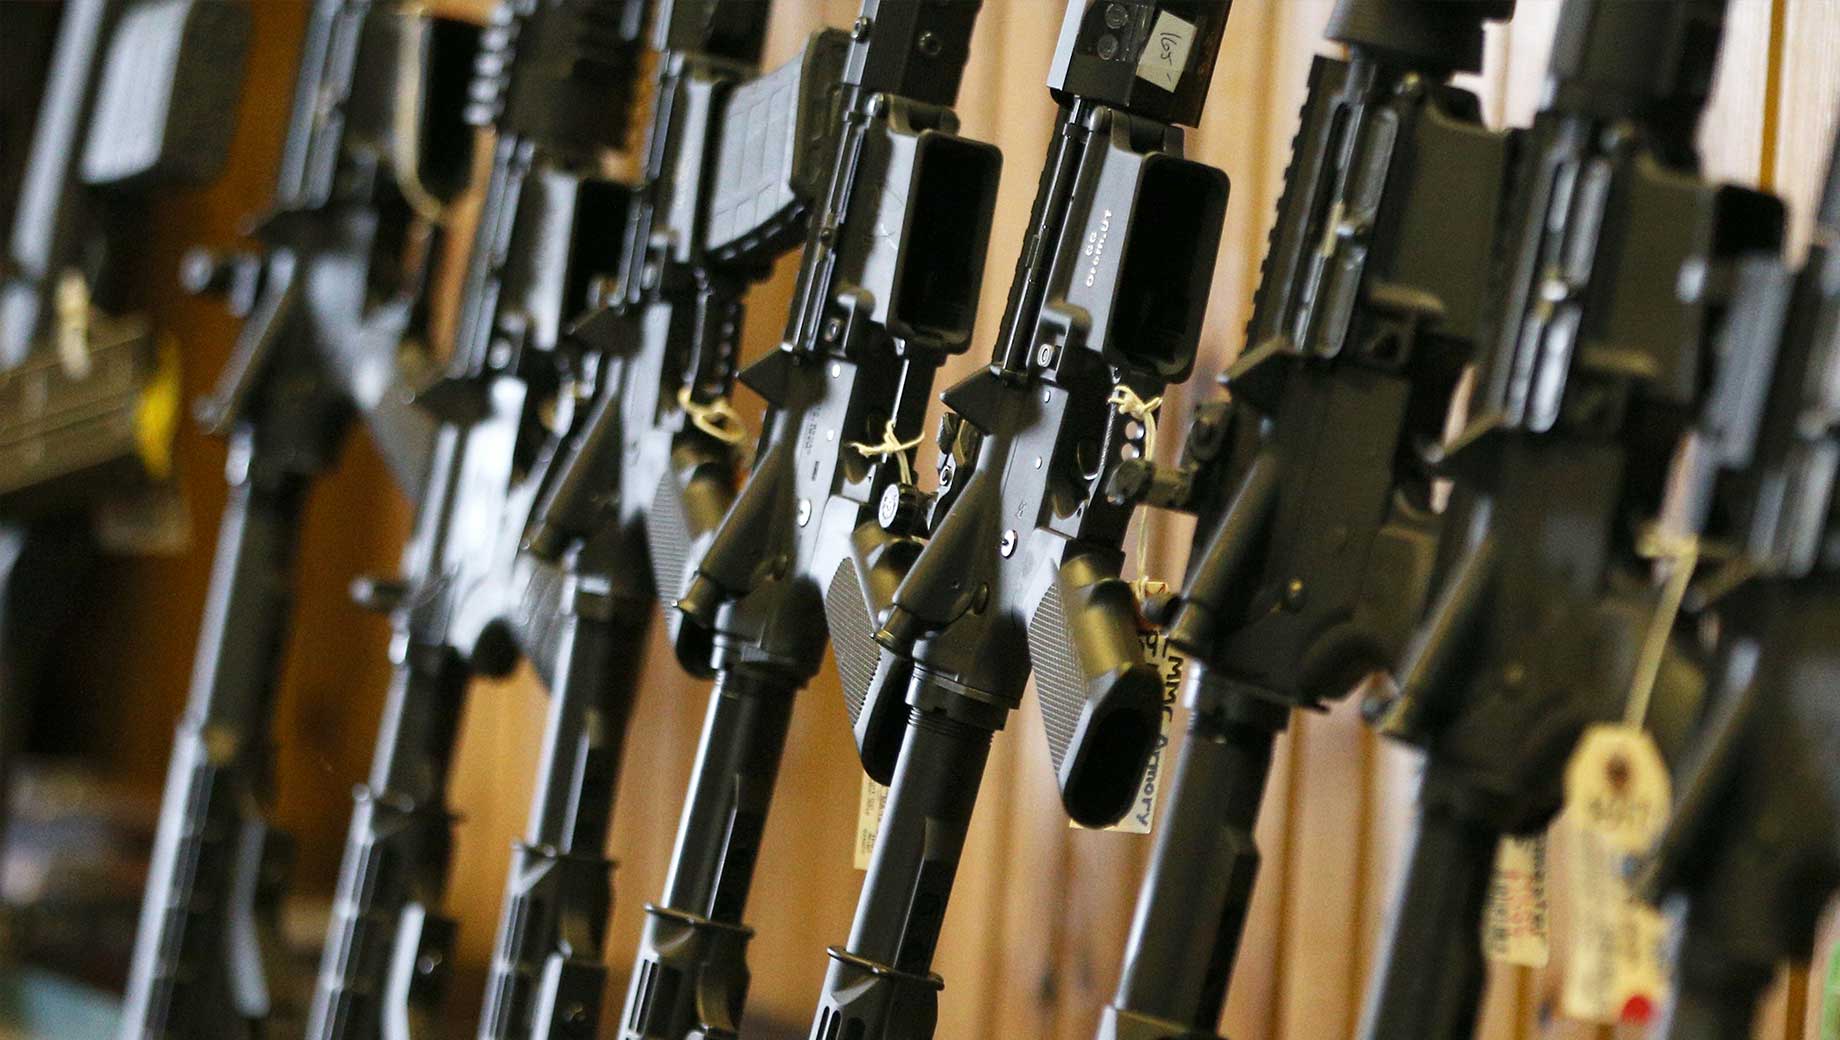 Colorado's new age limit for gun purchases took effect — and was